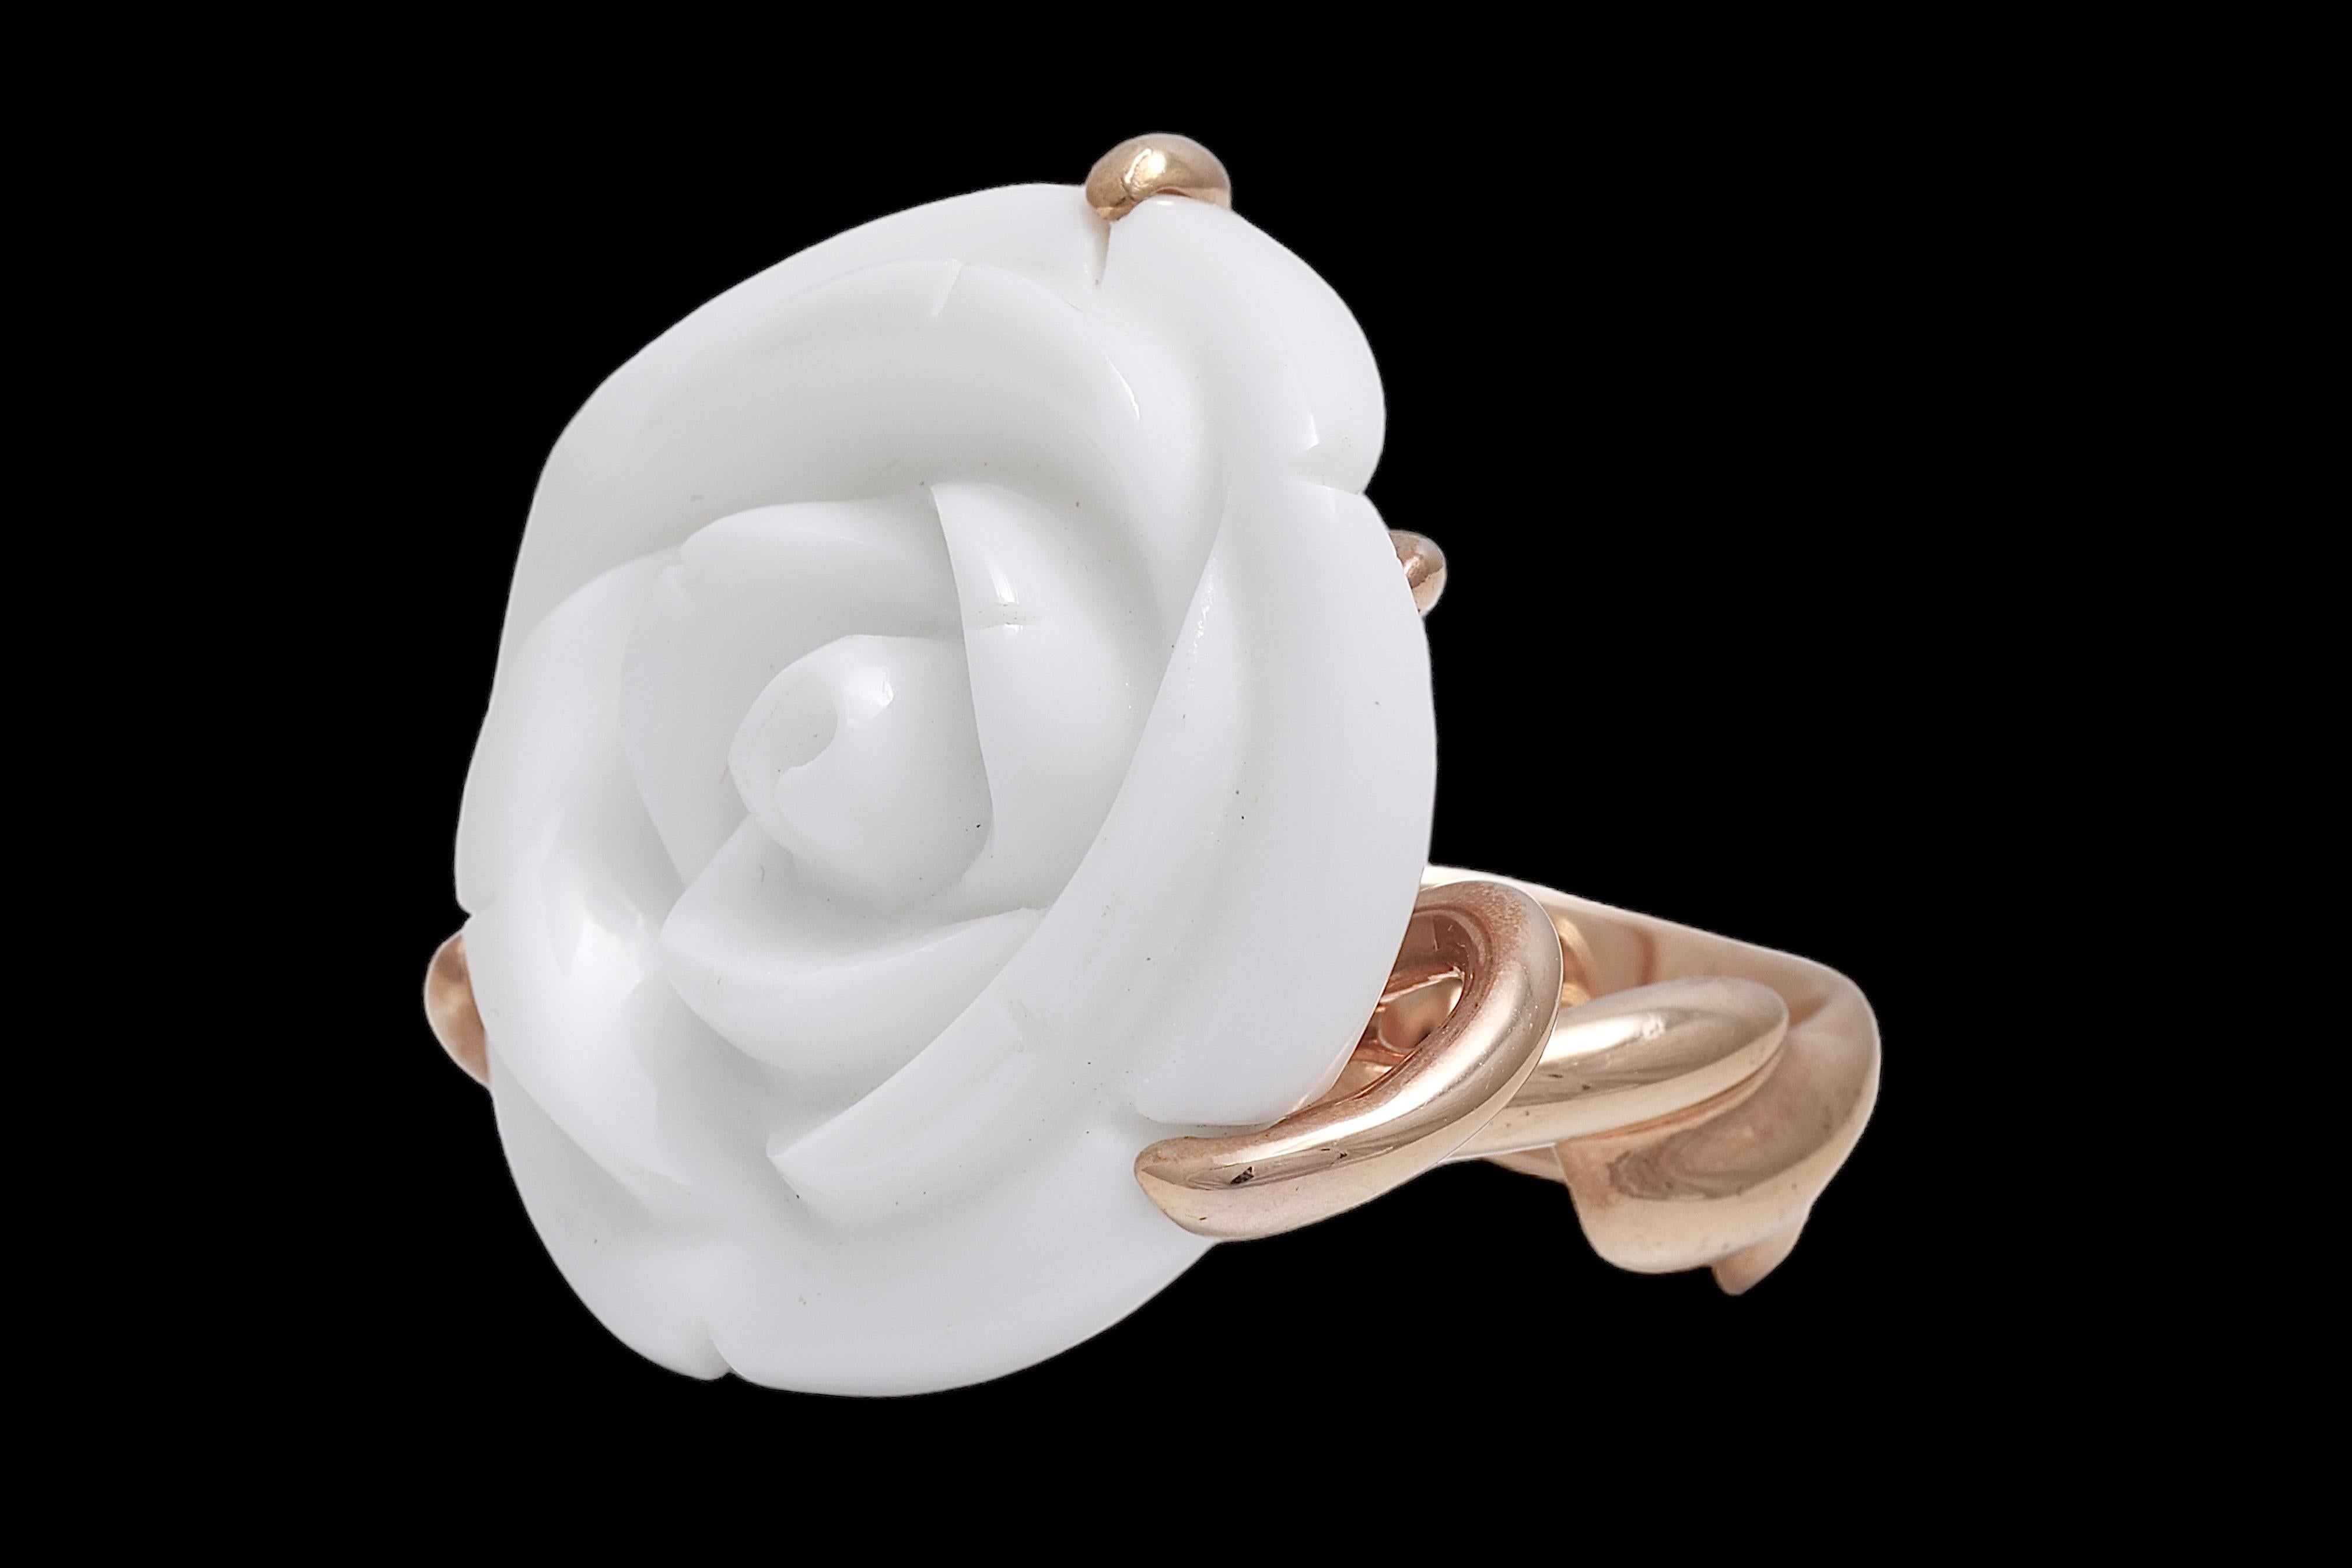 Magnificent 18 kt. Pink Gold Ring with Big White Agate Flower Cut Stone.

Agate: White flower cut agate stone, diameter 30.1 mm 

Material: 18 kt. Pink gold

Ring size : 53 EU /  6.5 US ( Can be resized for free) 

Total Weight : 24.4g / 0.860 oz /